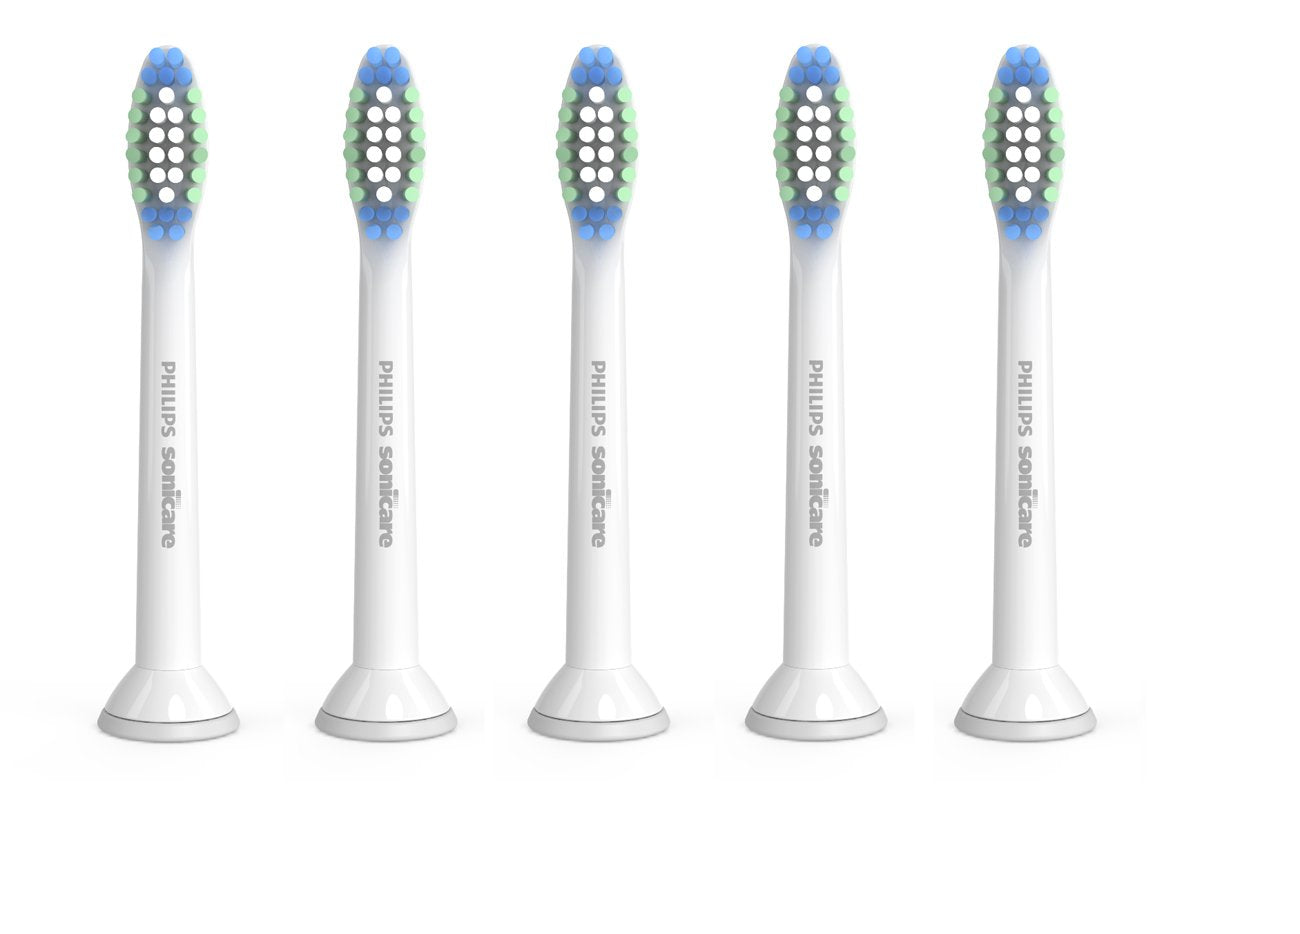 Genuine Philips Sonicare C1 Simply Clean Replacement Toothbrush Heads, 5 Pack, HX6015/03